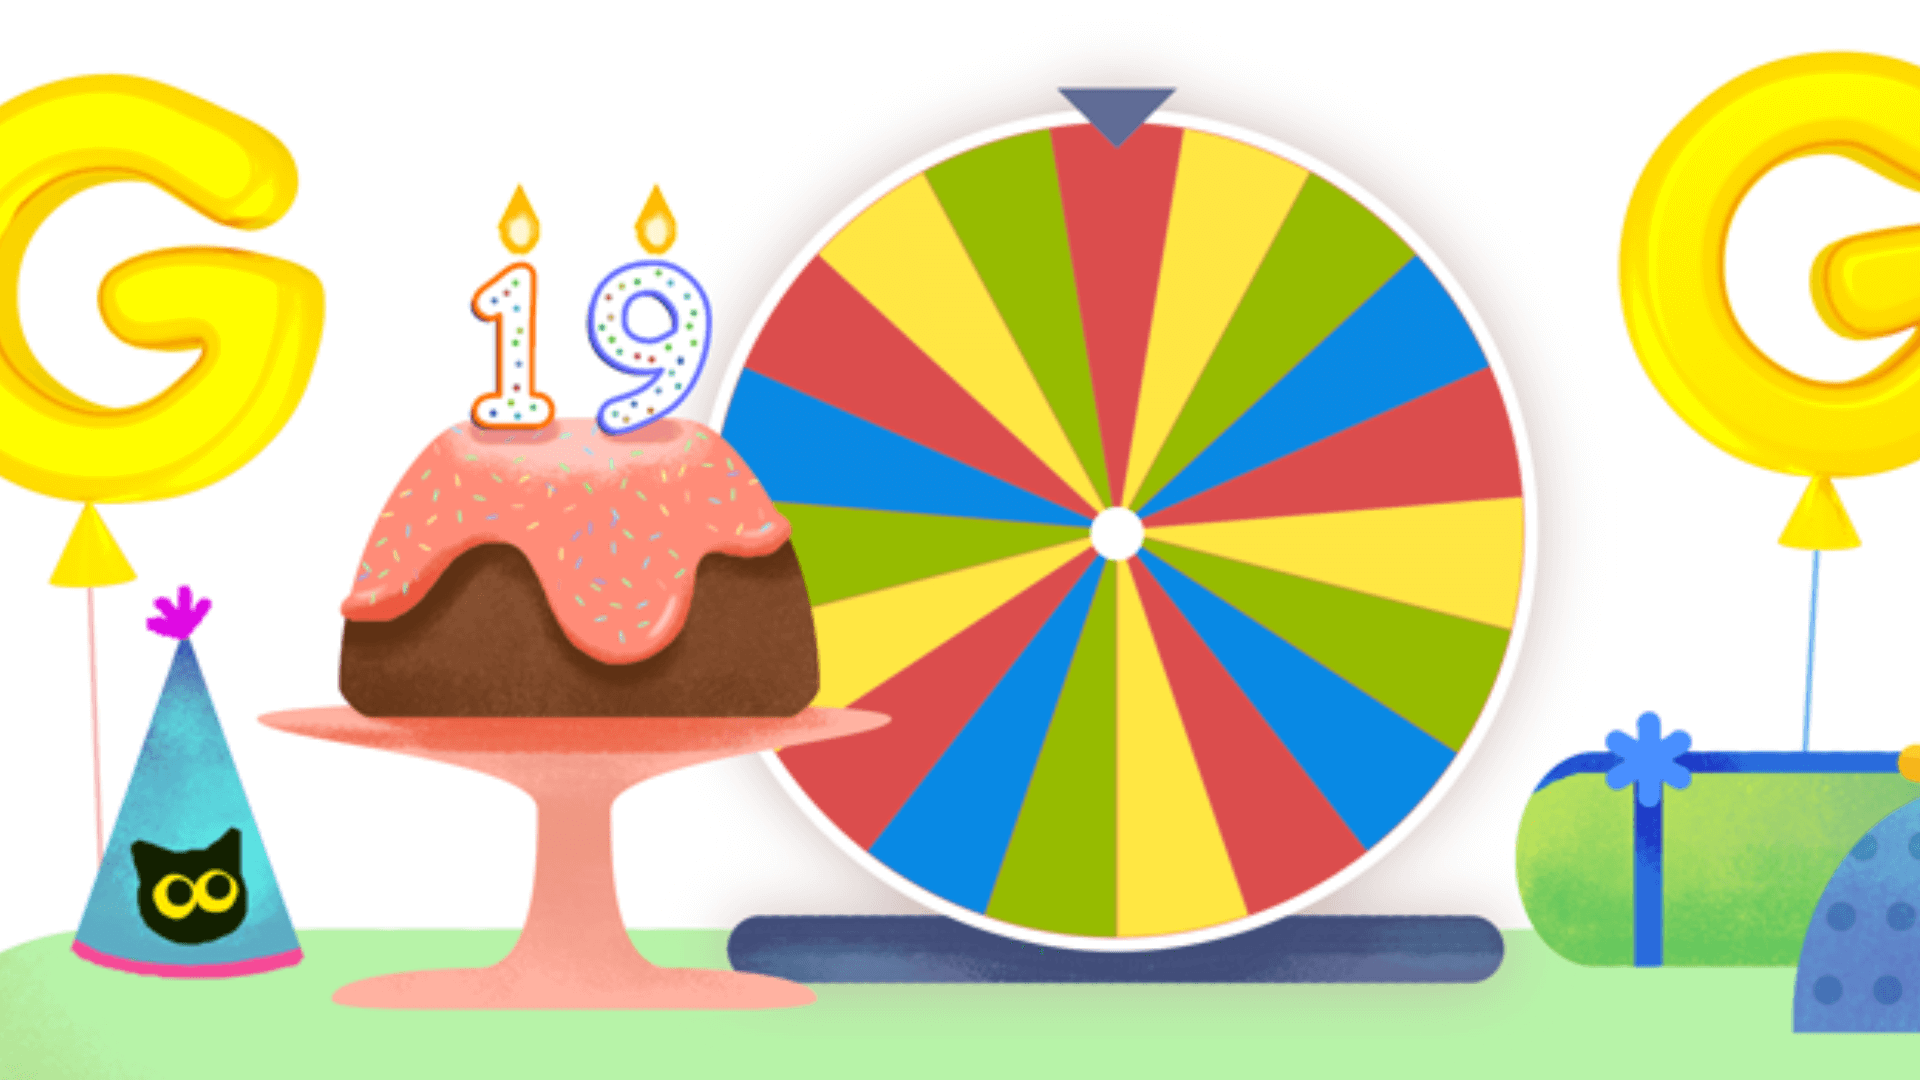 Google marks its 19th birthday with a 'Google birthday surprise spinner' doodle ...1920 x 1080